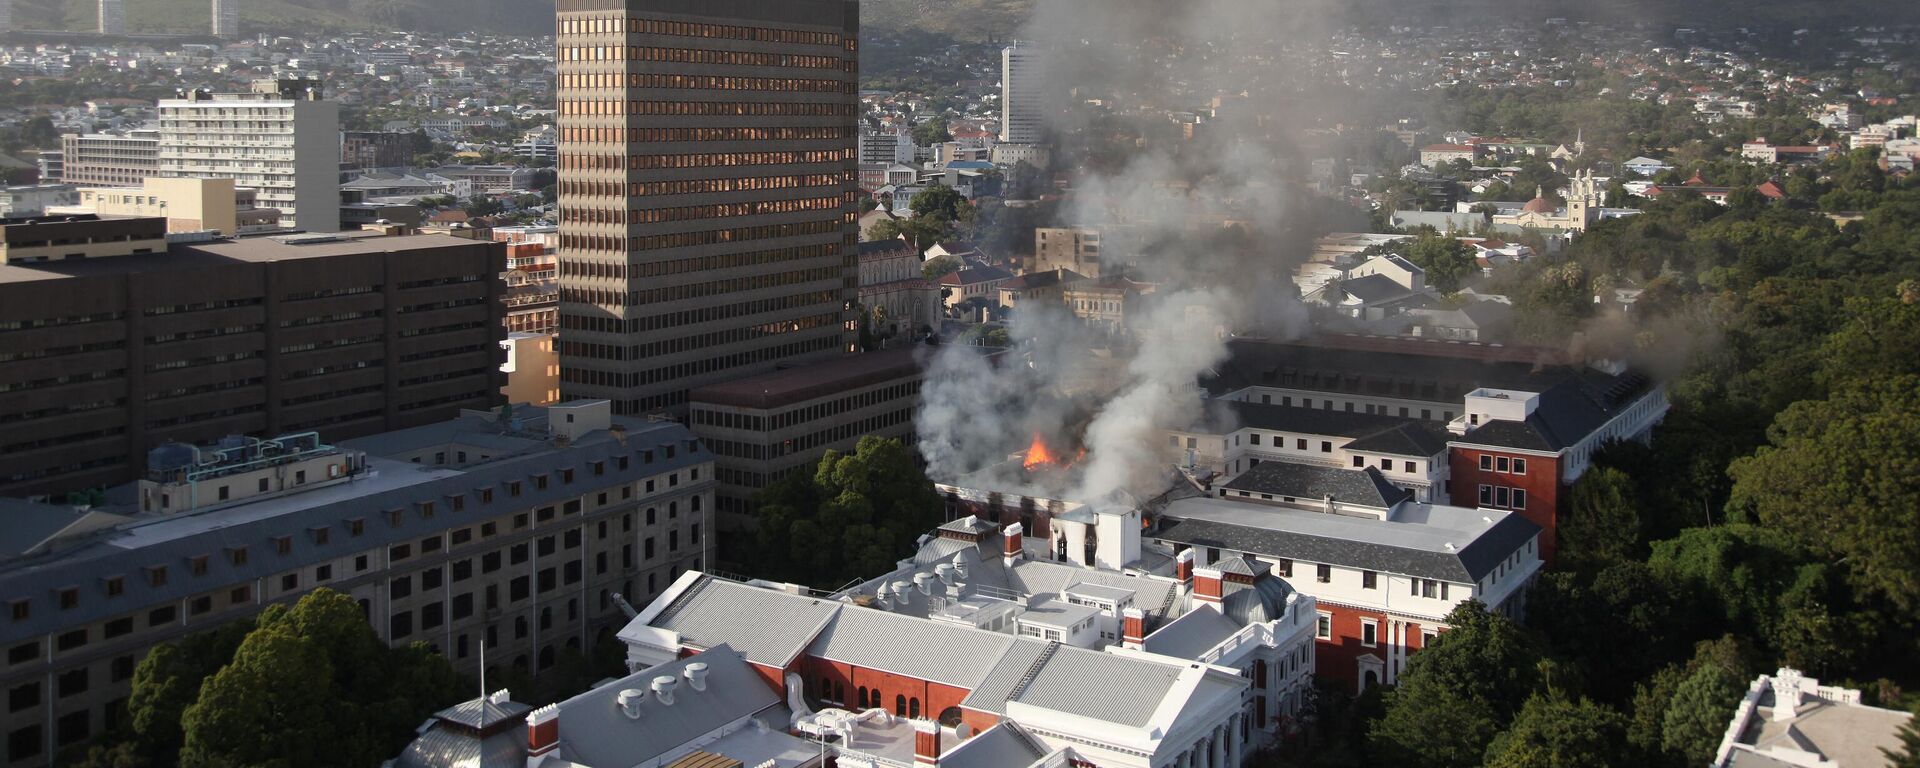 A general view of a building on fire at the South African Parliament precinct in Cape Town on January 2, 2022.  - Sputnik International, 1920, 02.01.2022